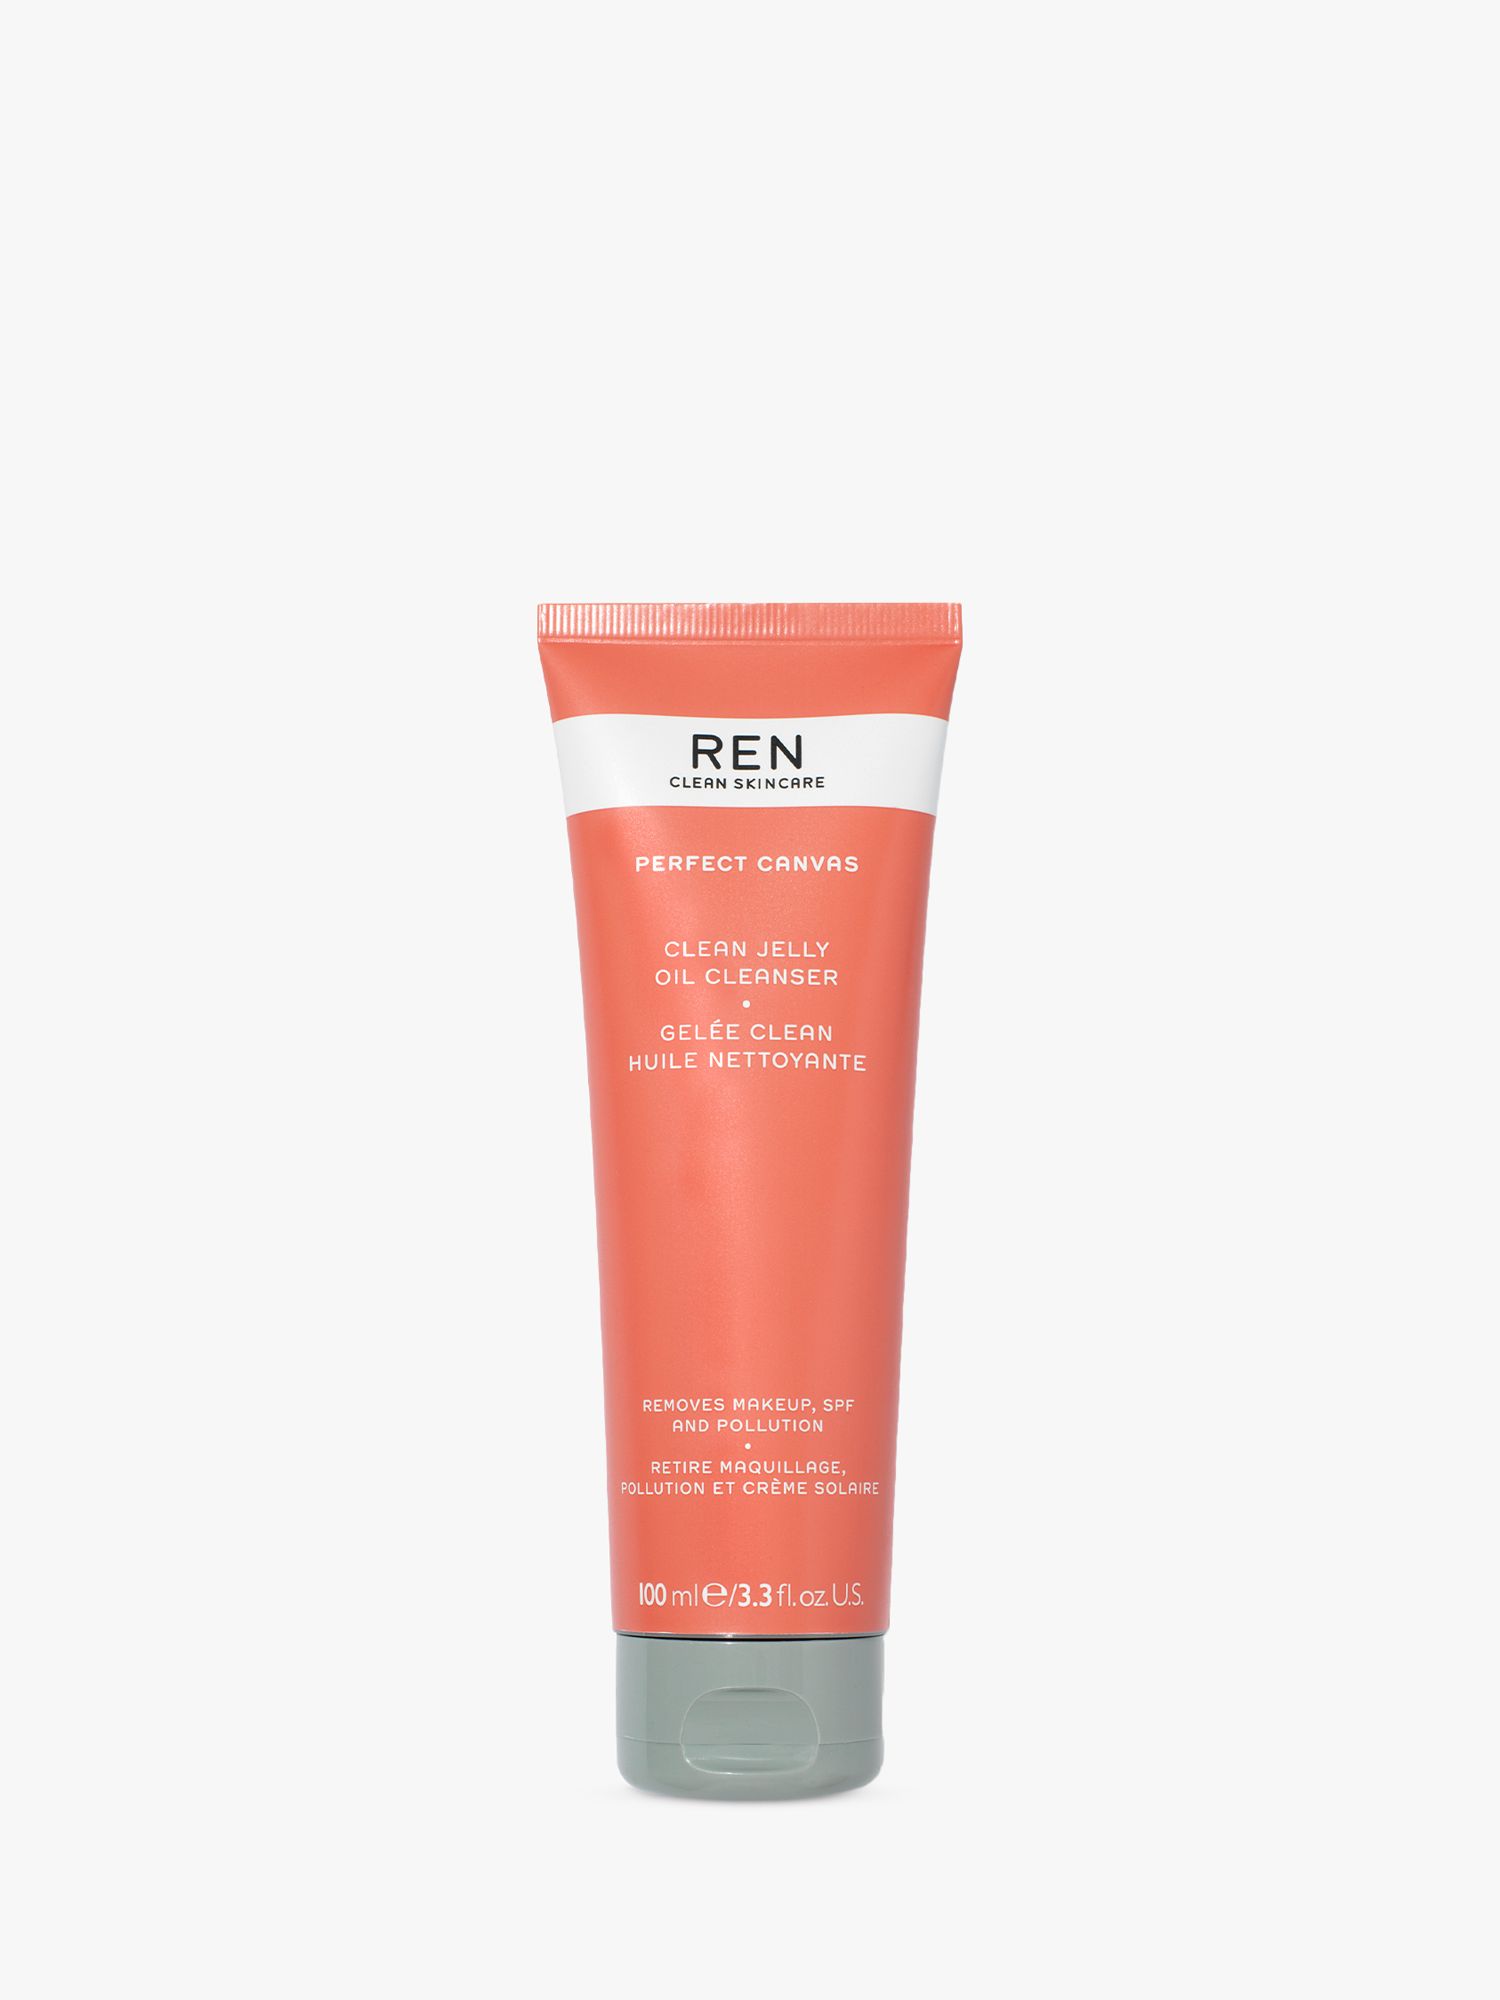 REN Clean Skincare Perfect Canvas Clean Jelly Oil Cleanser, 100ml 1